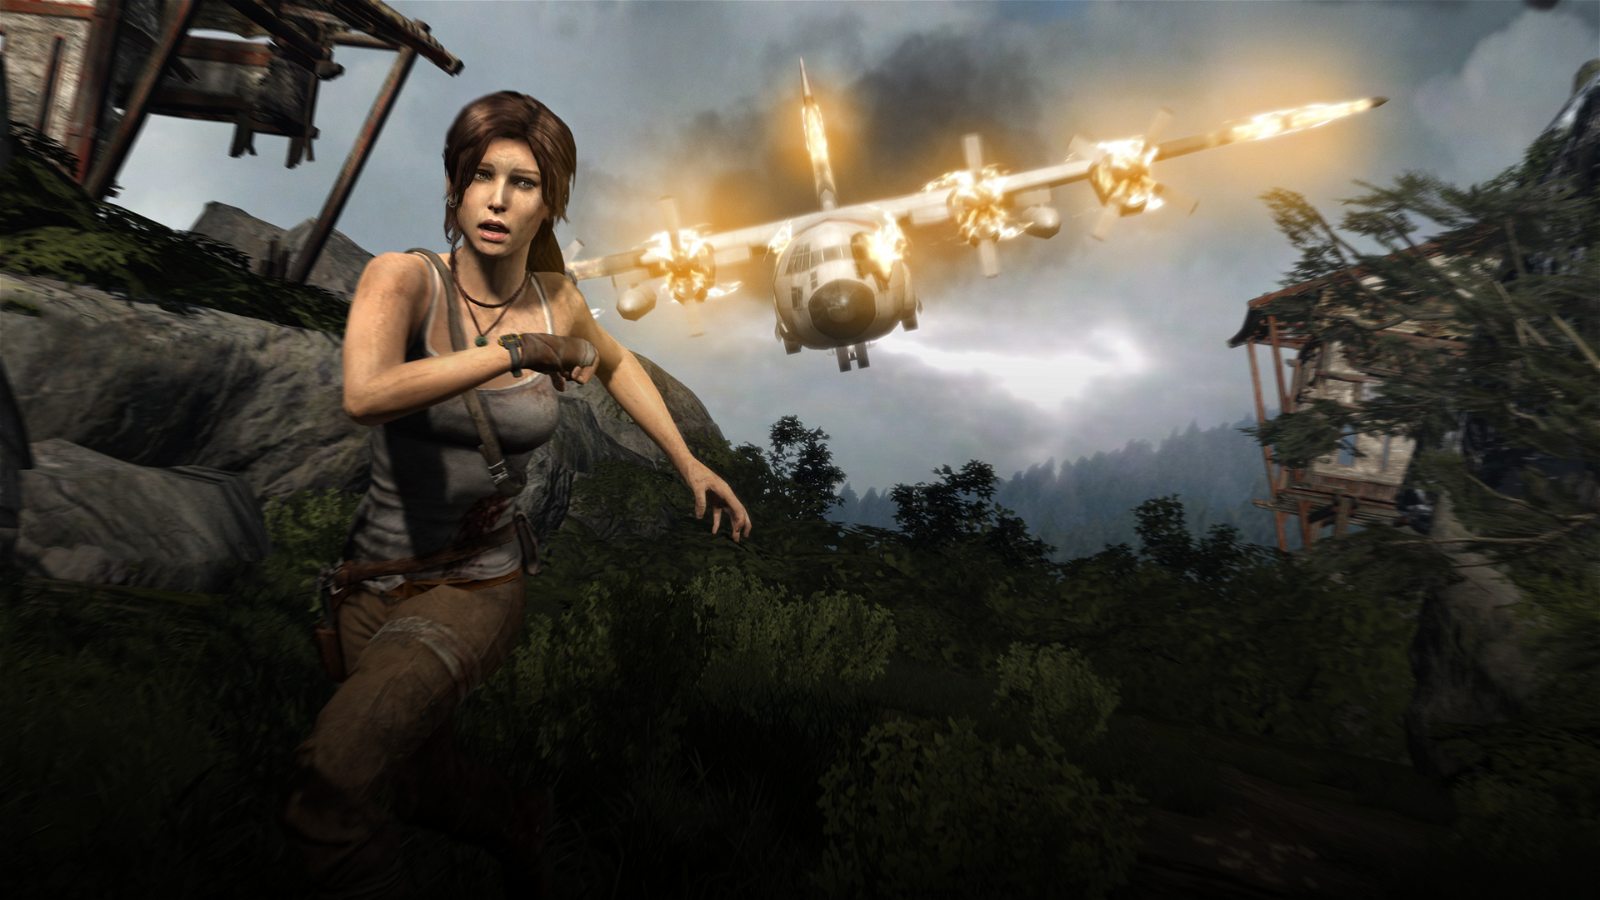 Still Not Her Own Game and Dead by Daylight Isn’t Enough, as Tomb Raider’s Lara Croft Hits a Battle Royale No-One Expected